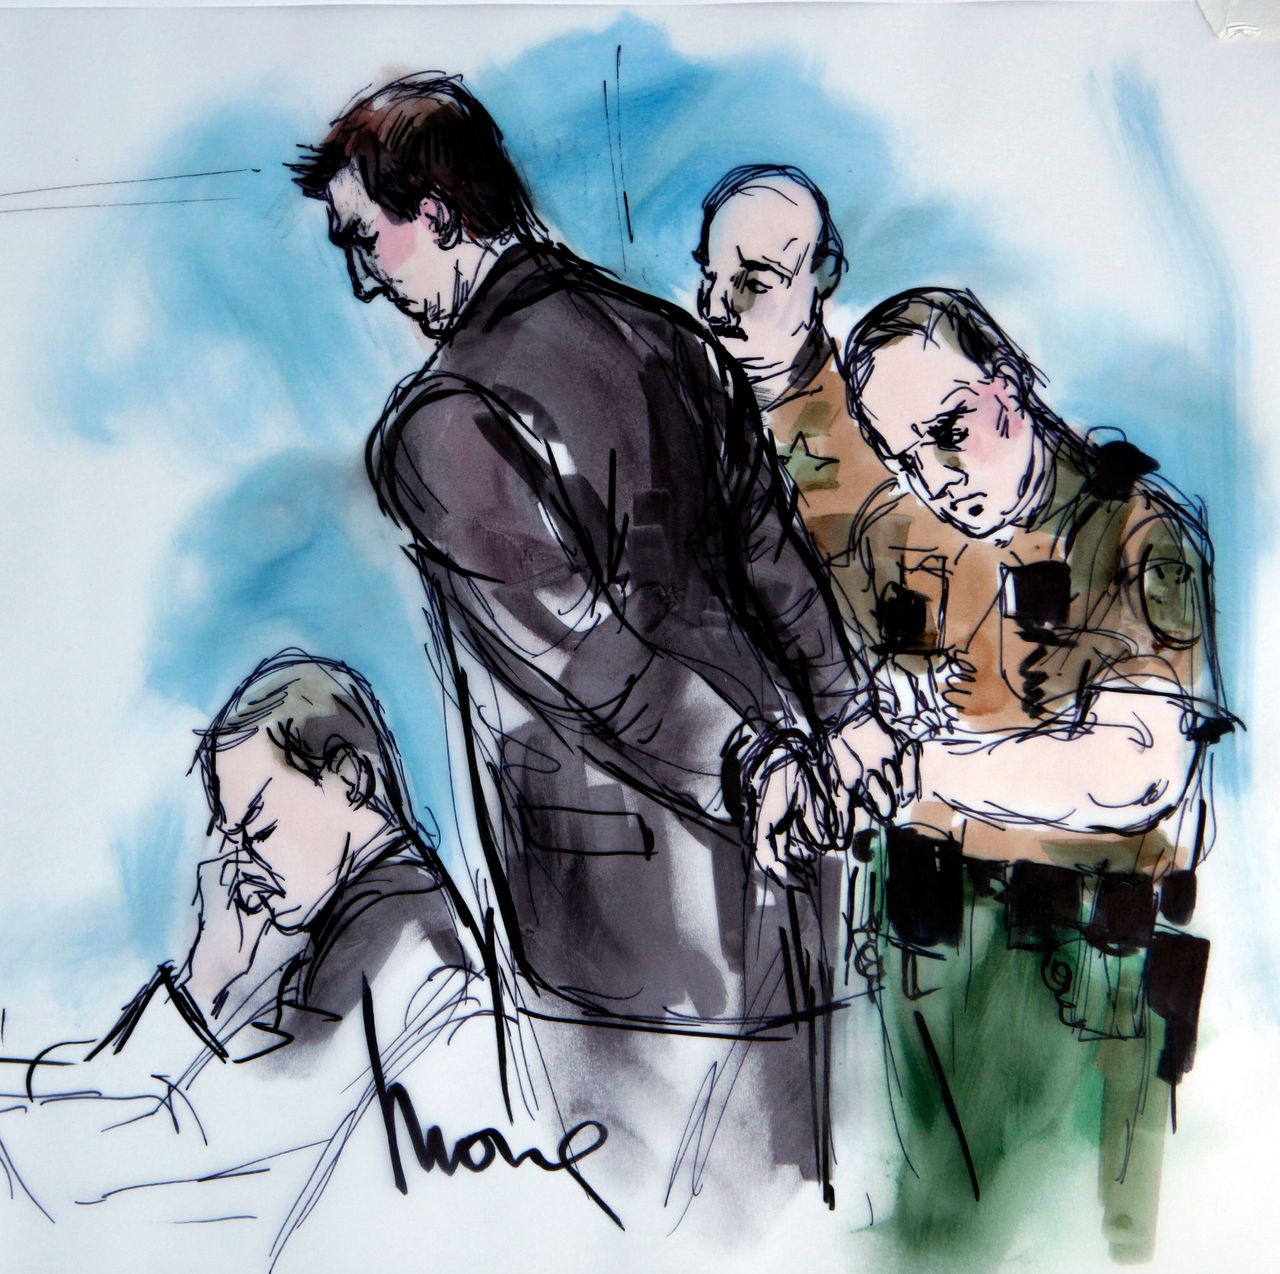 <em>In this artist's sketch, former BART police officer Johannes Mehserle, center, is taken into custody at the Criminal Justice Center in Los Angeles on July 8, 2010, as his attorney Michael Rains, left, reacts after the verdict of guilty of involuntary manslaughter in the killing of Oscar Grant. (AP Photo/Mona Shafer Edwards)</em>